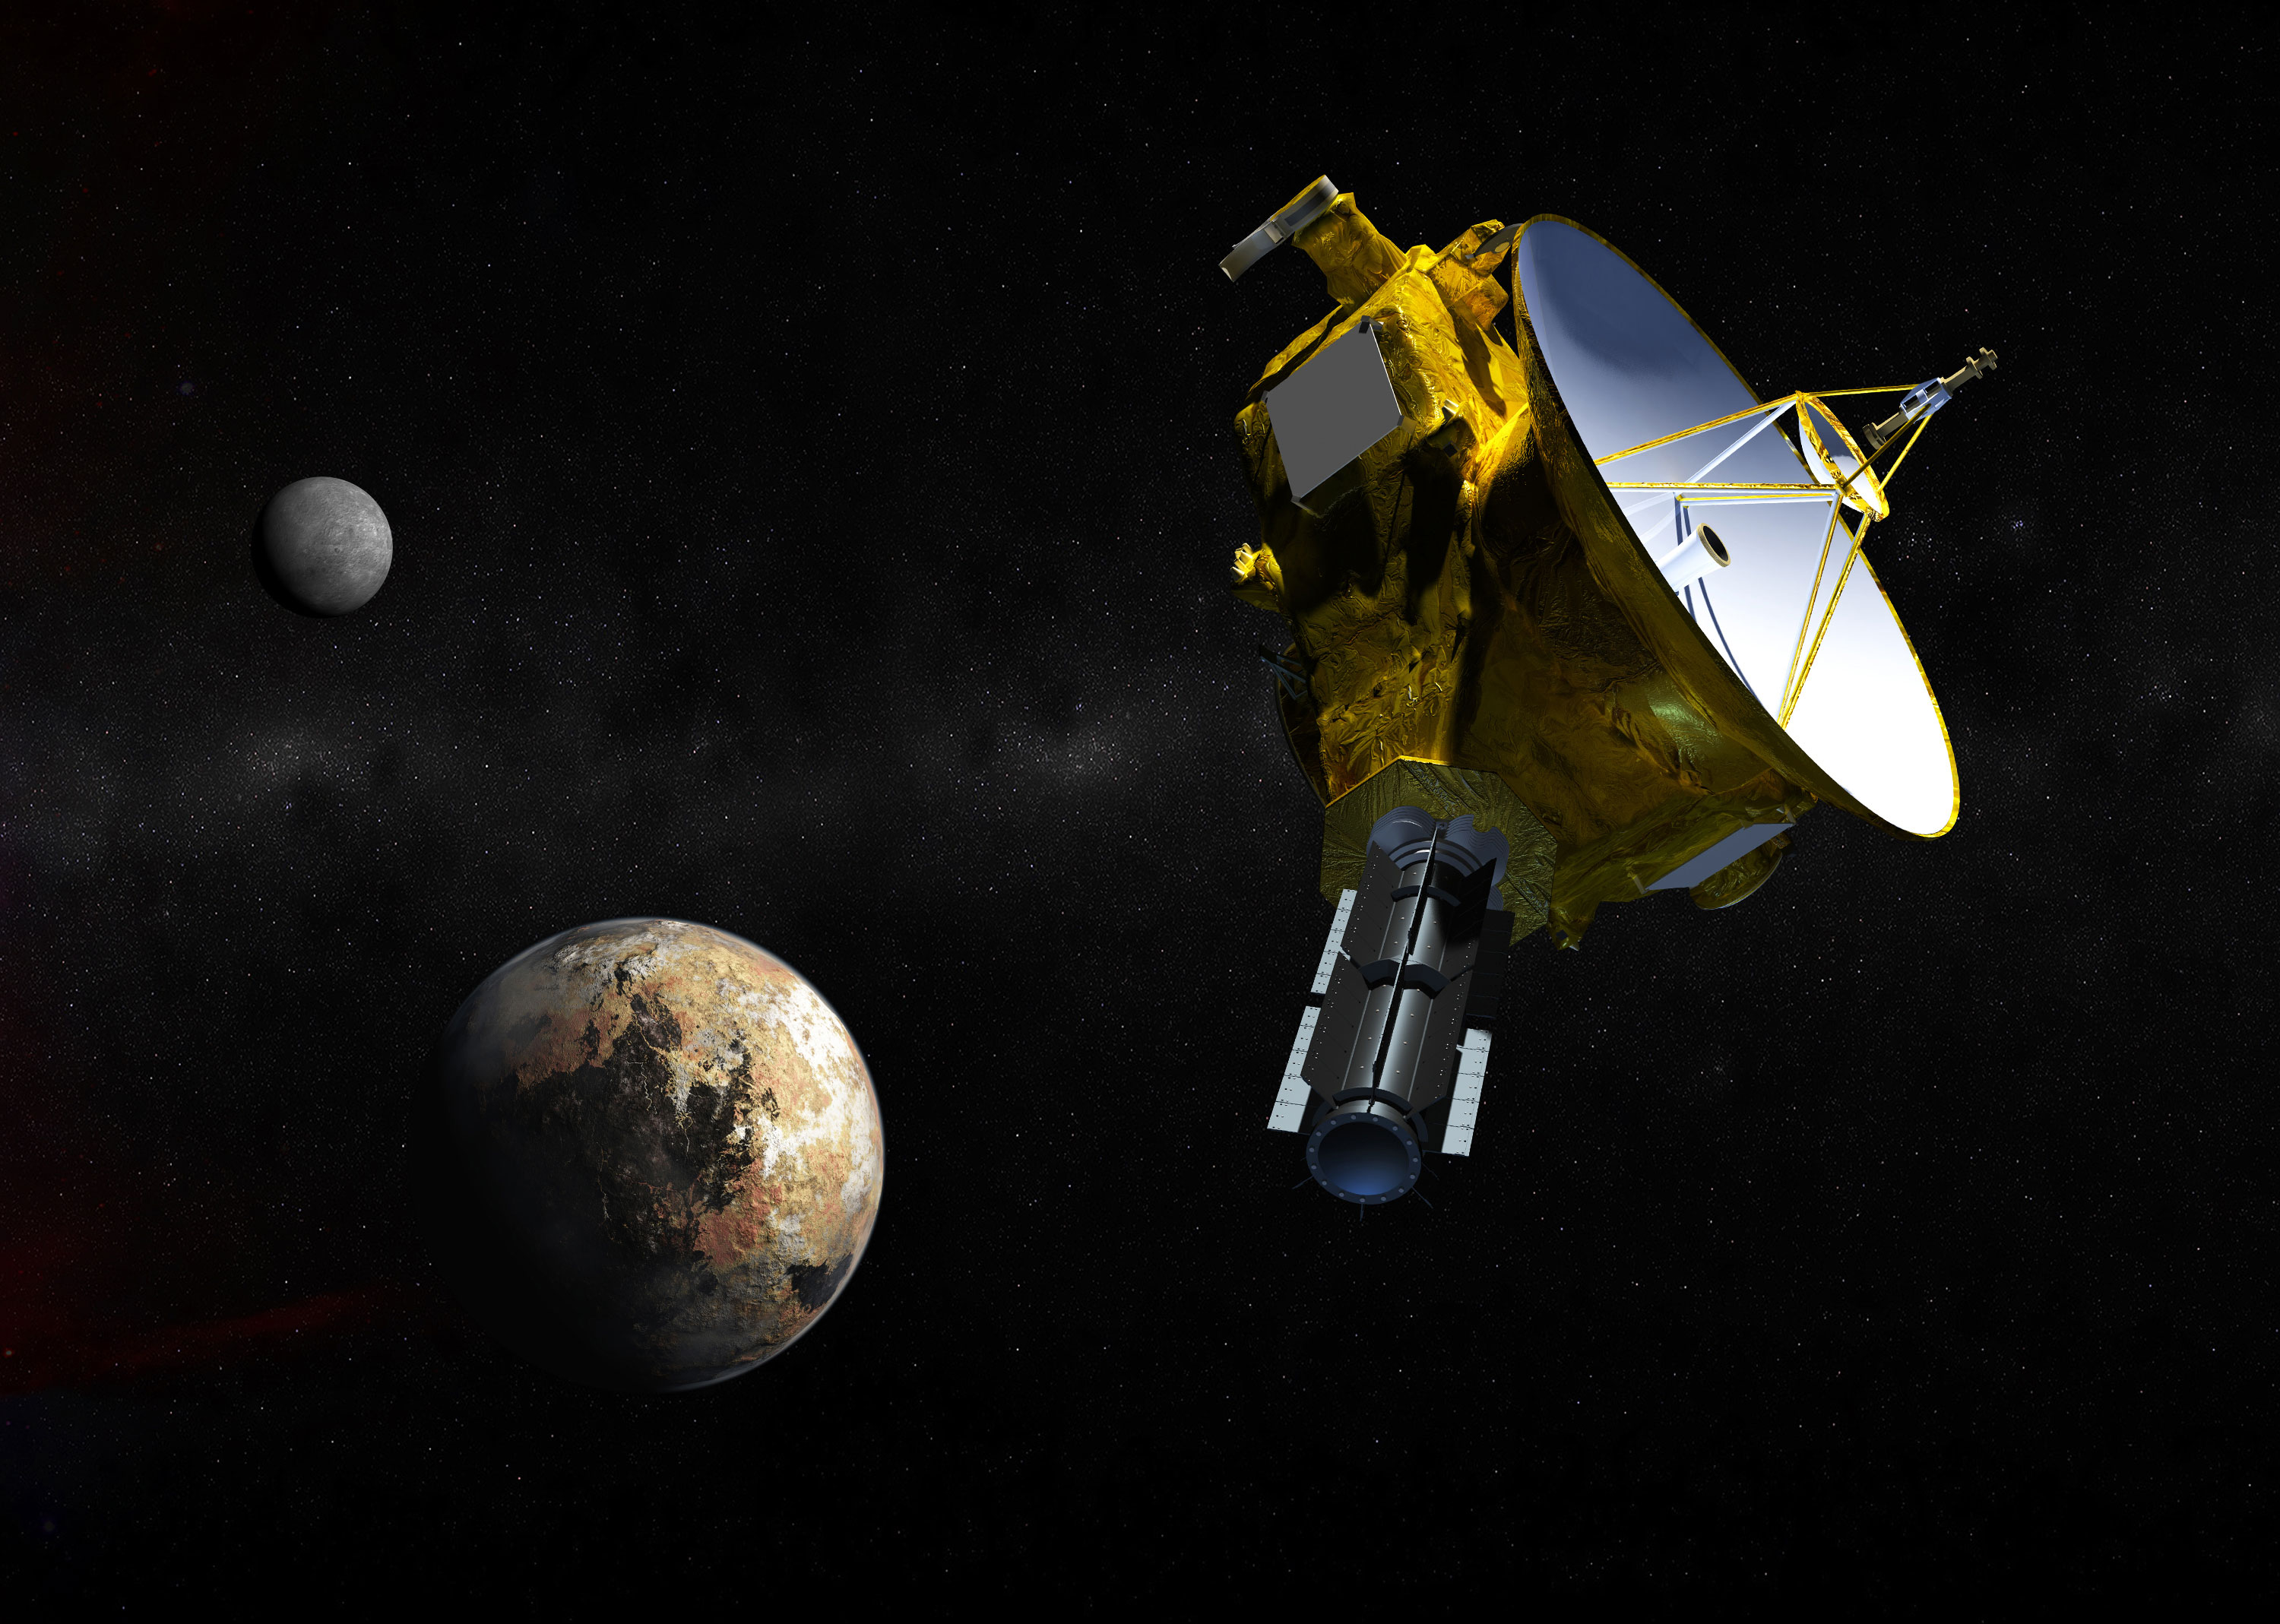 Artist’s concept of the New Horizons spacecraft as it approaches Pluto. The craft will study the global geology and geomorphology of Pluto and large moon Charon, map their surface compositions and temperatures, and examine Pluto’s atmosphere in detail. Credit: Johns Hopkins University Applied Physics Laboratory/Southwest Research Institute (JHUAPL/SwRI)